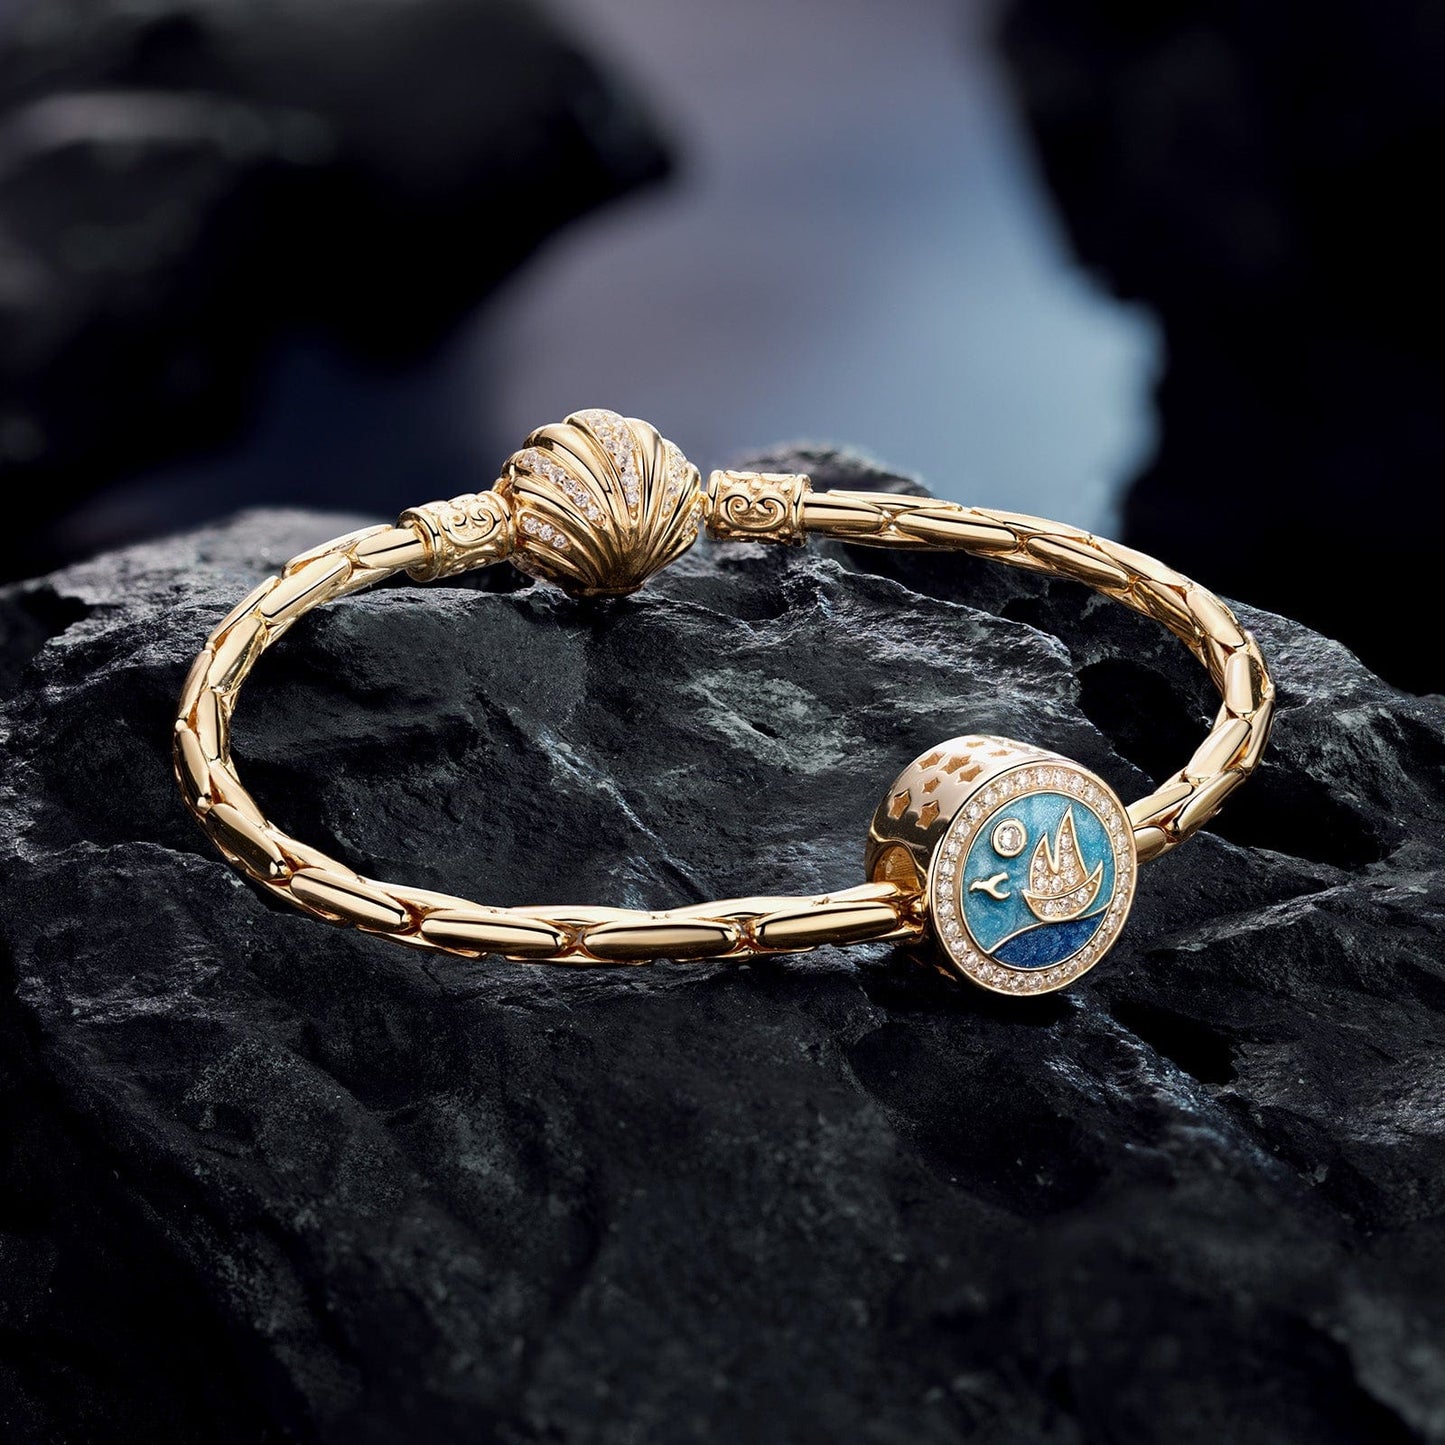 Sail Away Azure Tarnish-resistant Silver Charms With Enamel In 14K Gold Plated